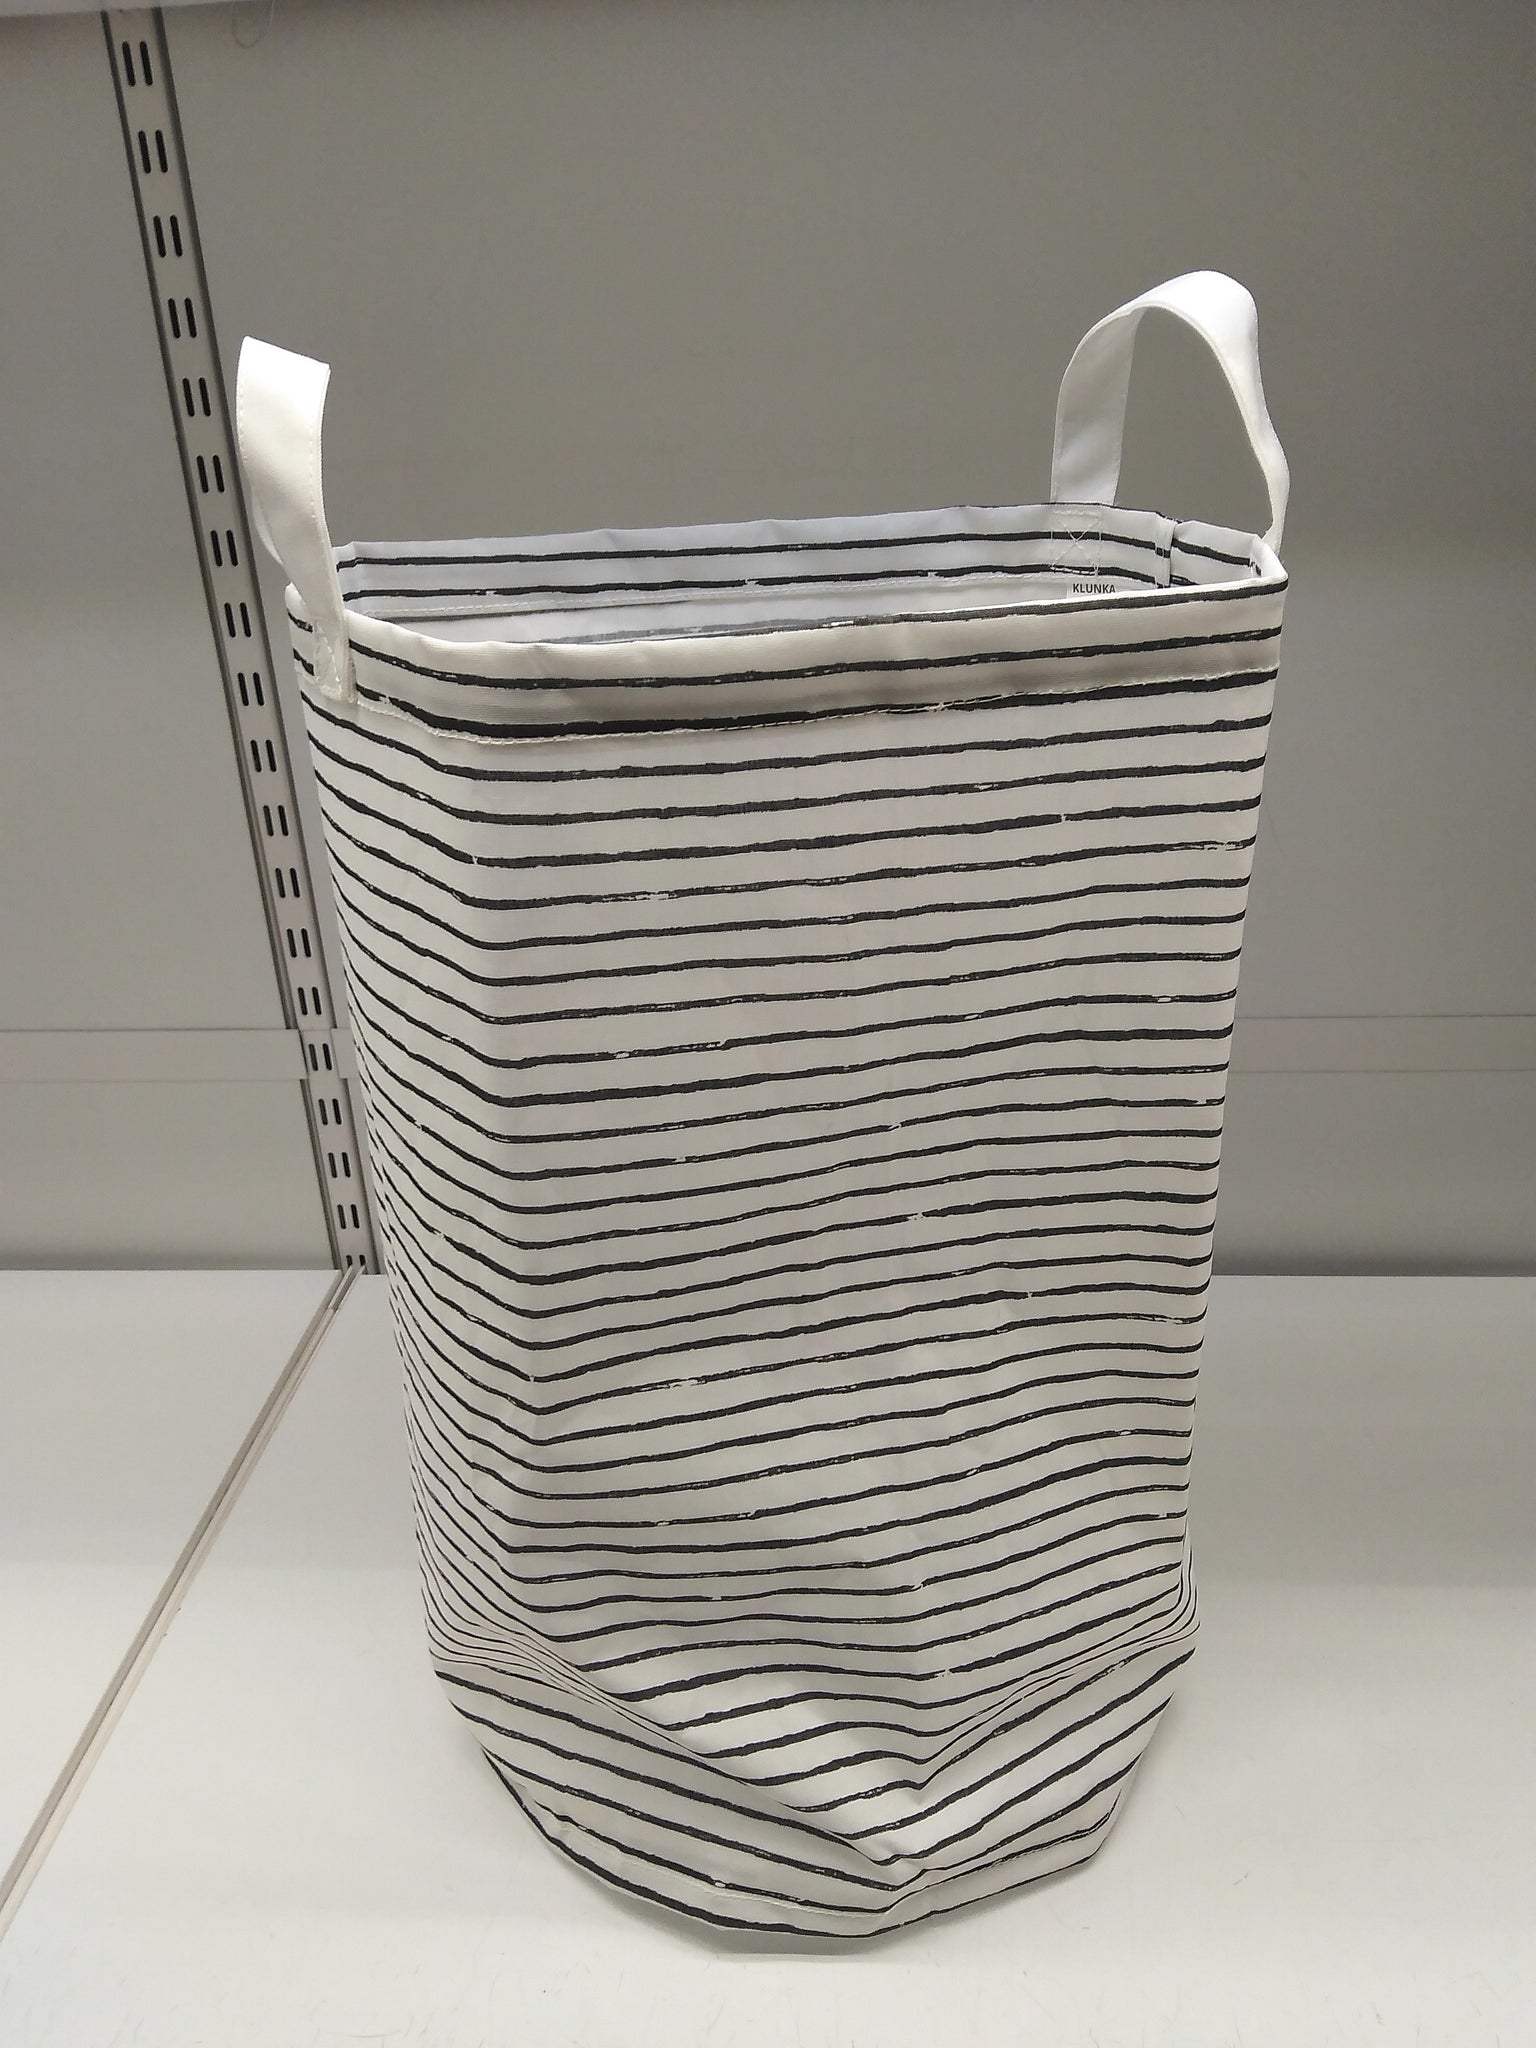 FLADDRIG Lunch bag, patterned gray, 9 ¾x6 ¼x10 ¾ - IKEA